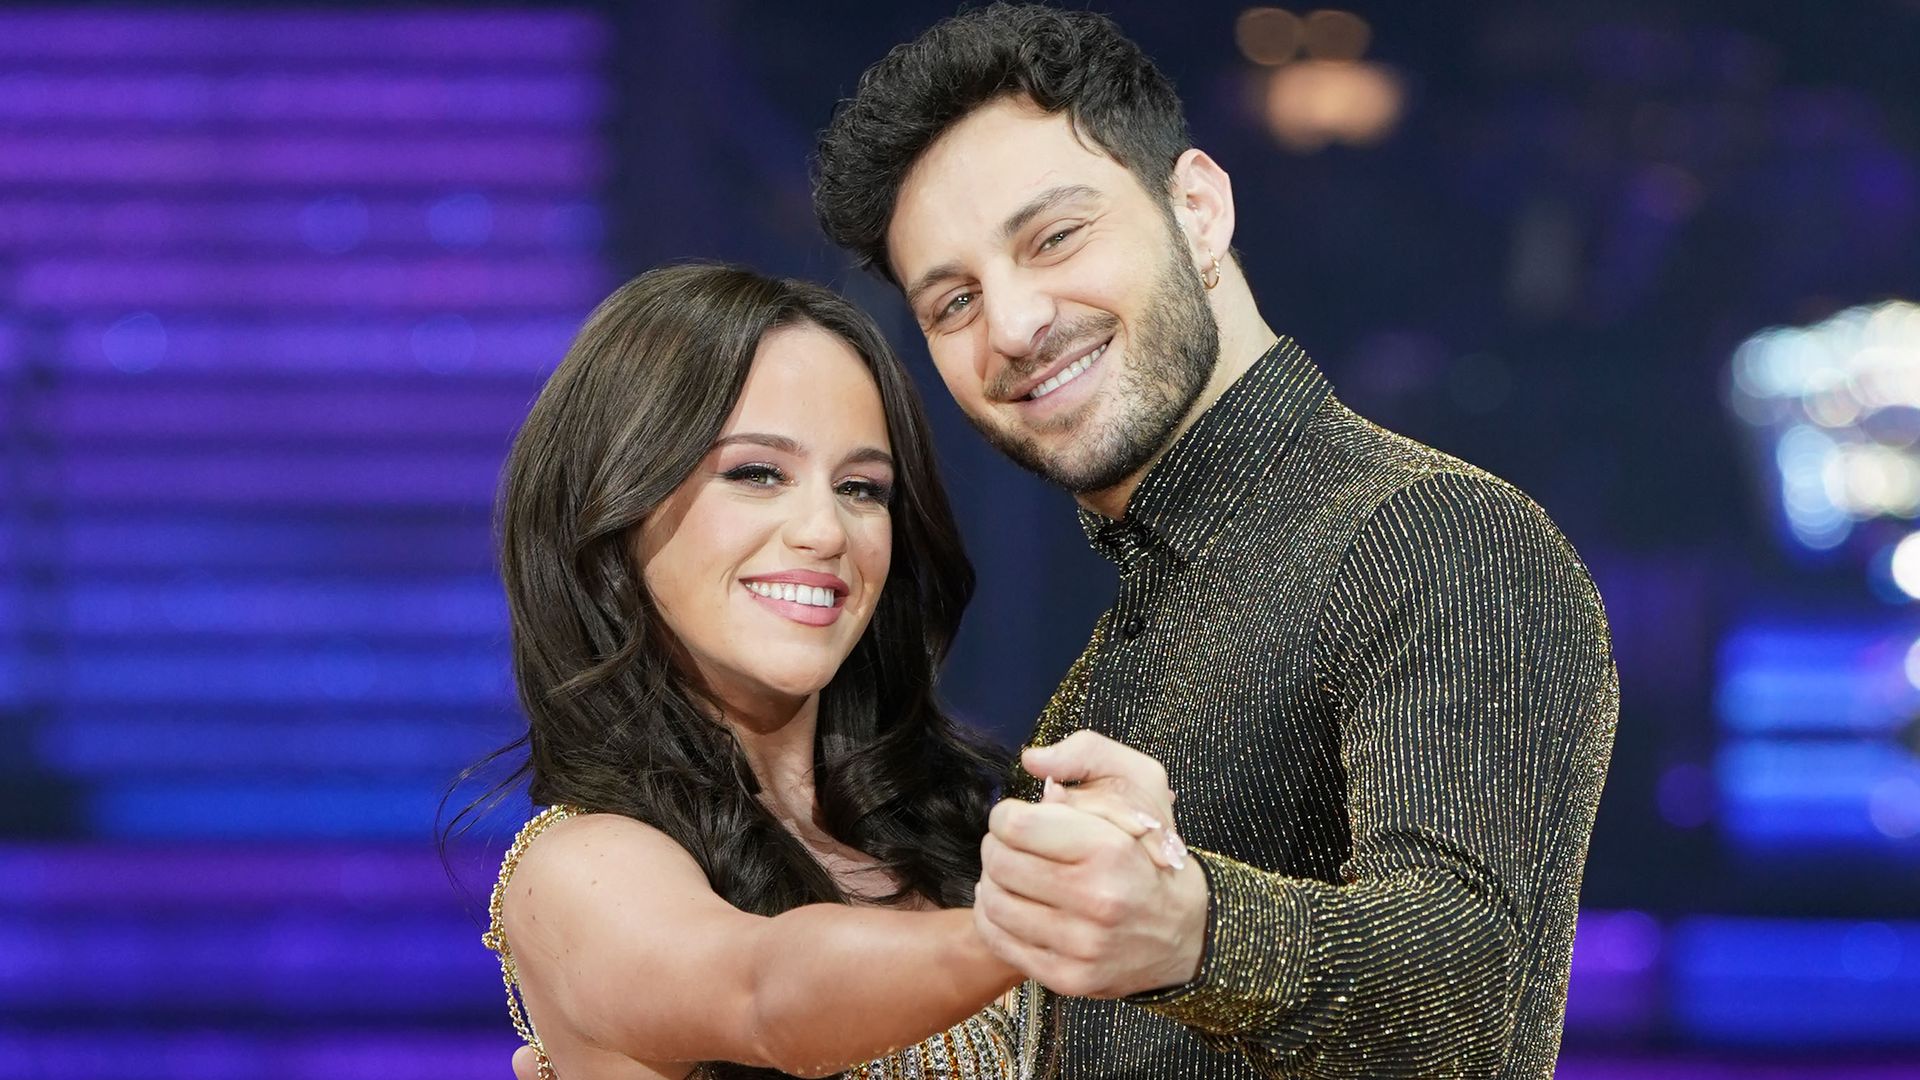 Ellie Leach and Vito Coppola during a photocall for the Strictly Come Dancing Live Tour at the Utilita Arena Birmingham, in Birmingham.